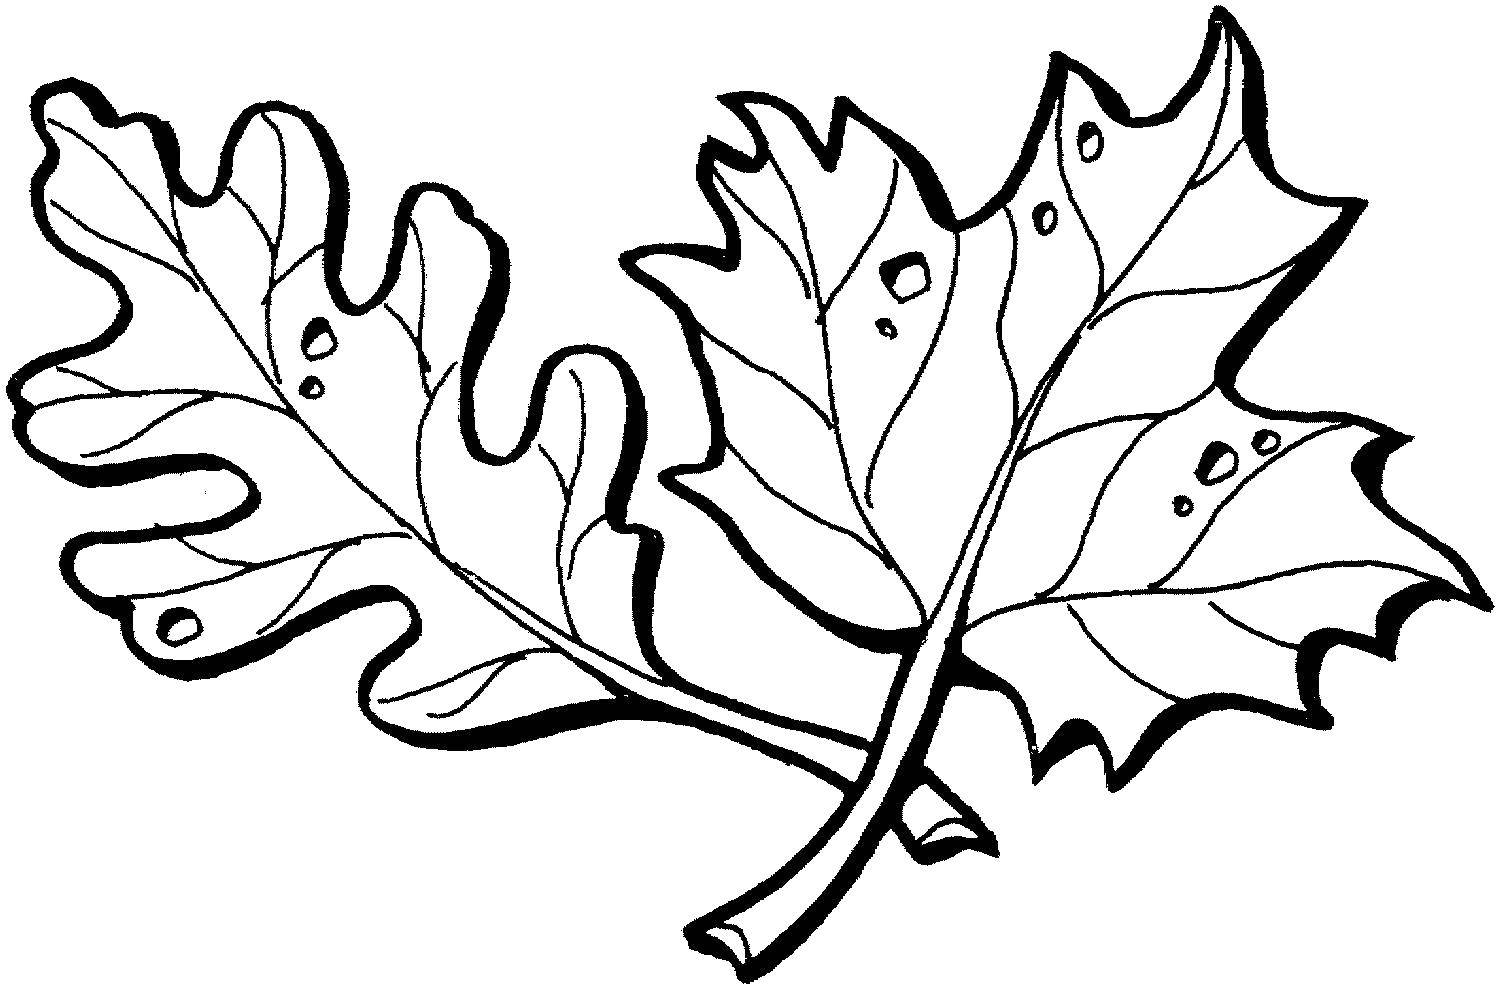 Coloring Oak leaves. Category autumn. Tags:  leaves.